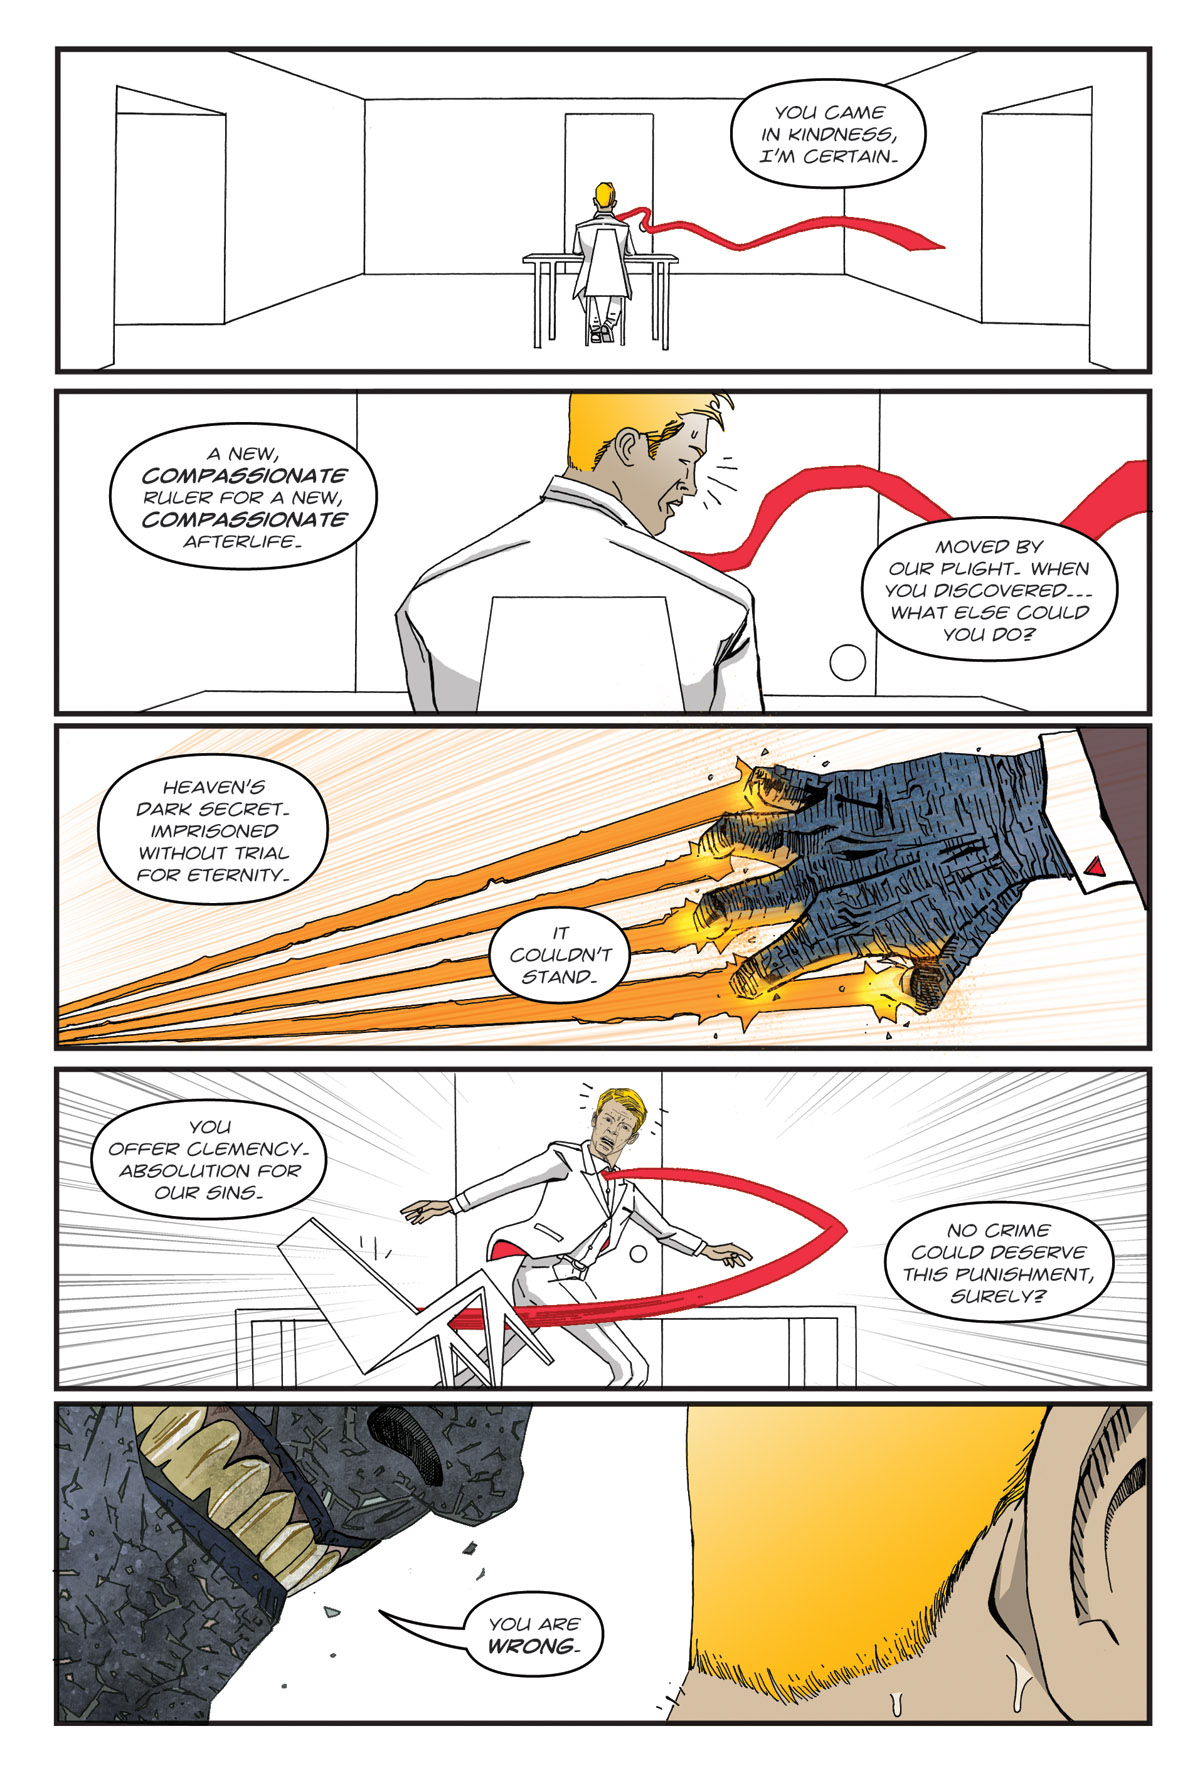 Afterlife Inc. | The Black Room | Page 1